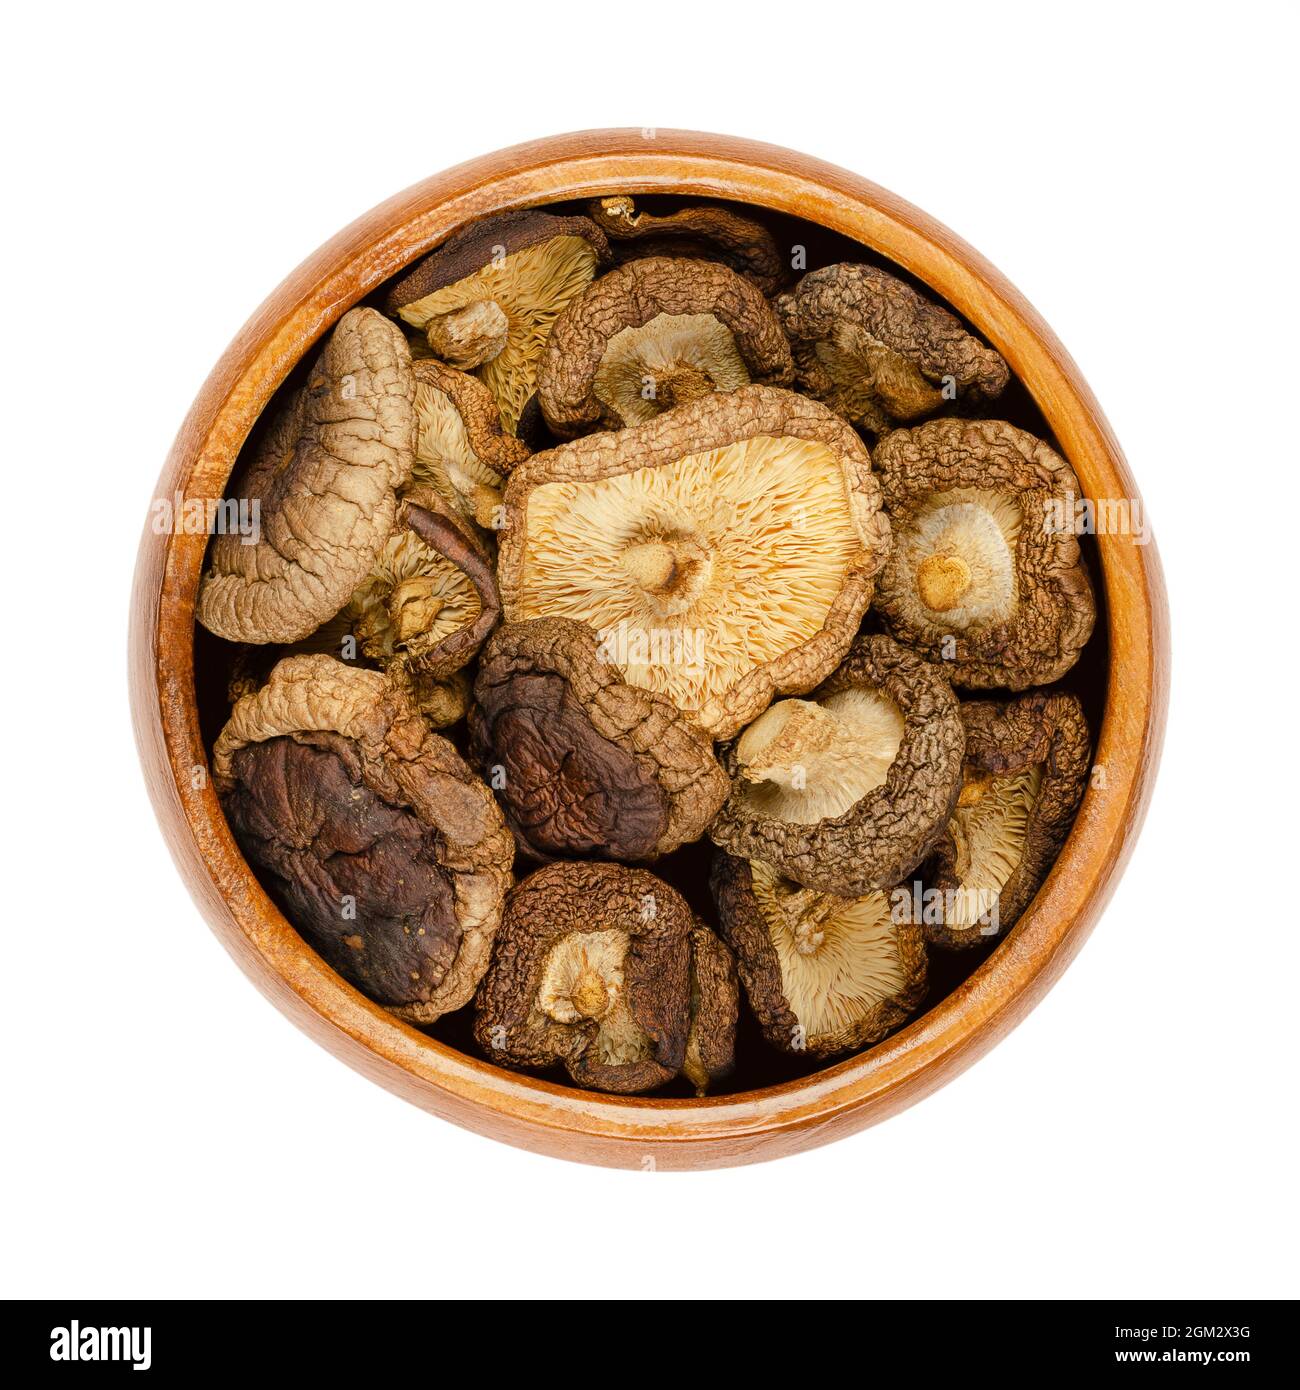 Dried shiitake mushrooms, in a wooden bowl. Lentinula edodes, edible mushrooms, native to East Asia, also used in traditional medicine. Stock Photo